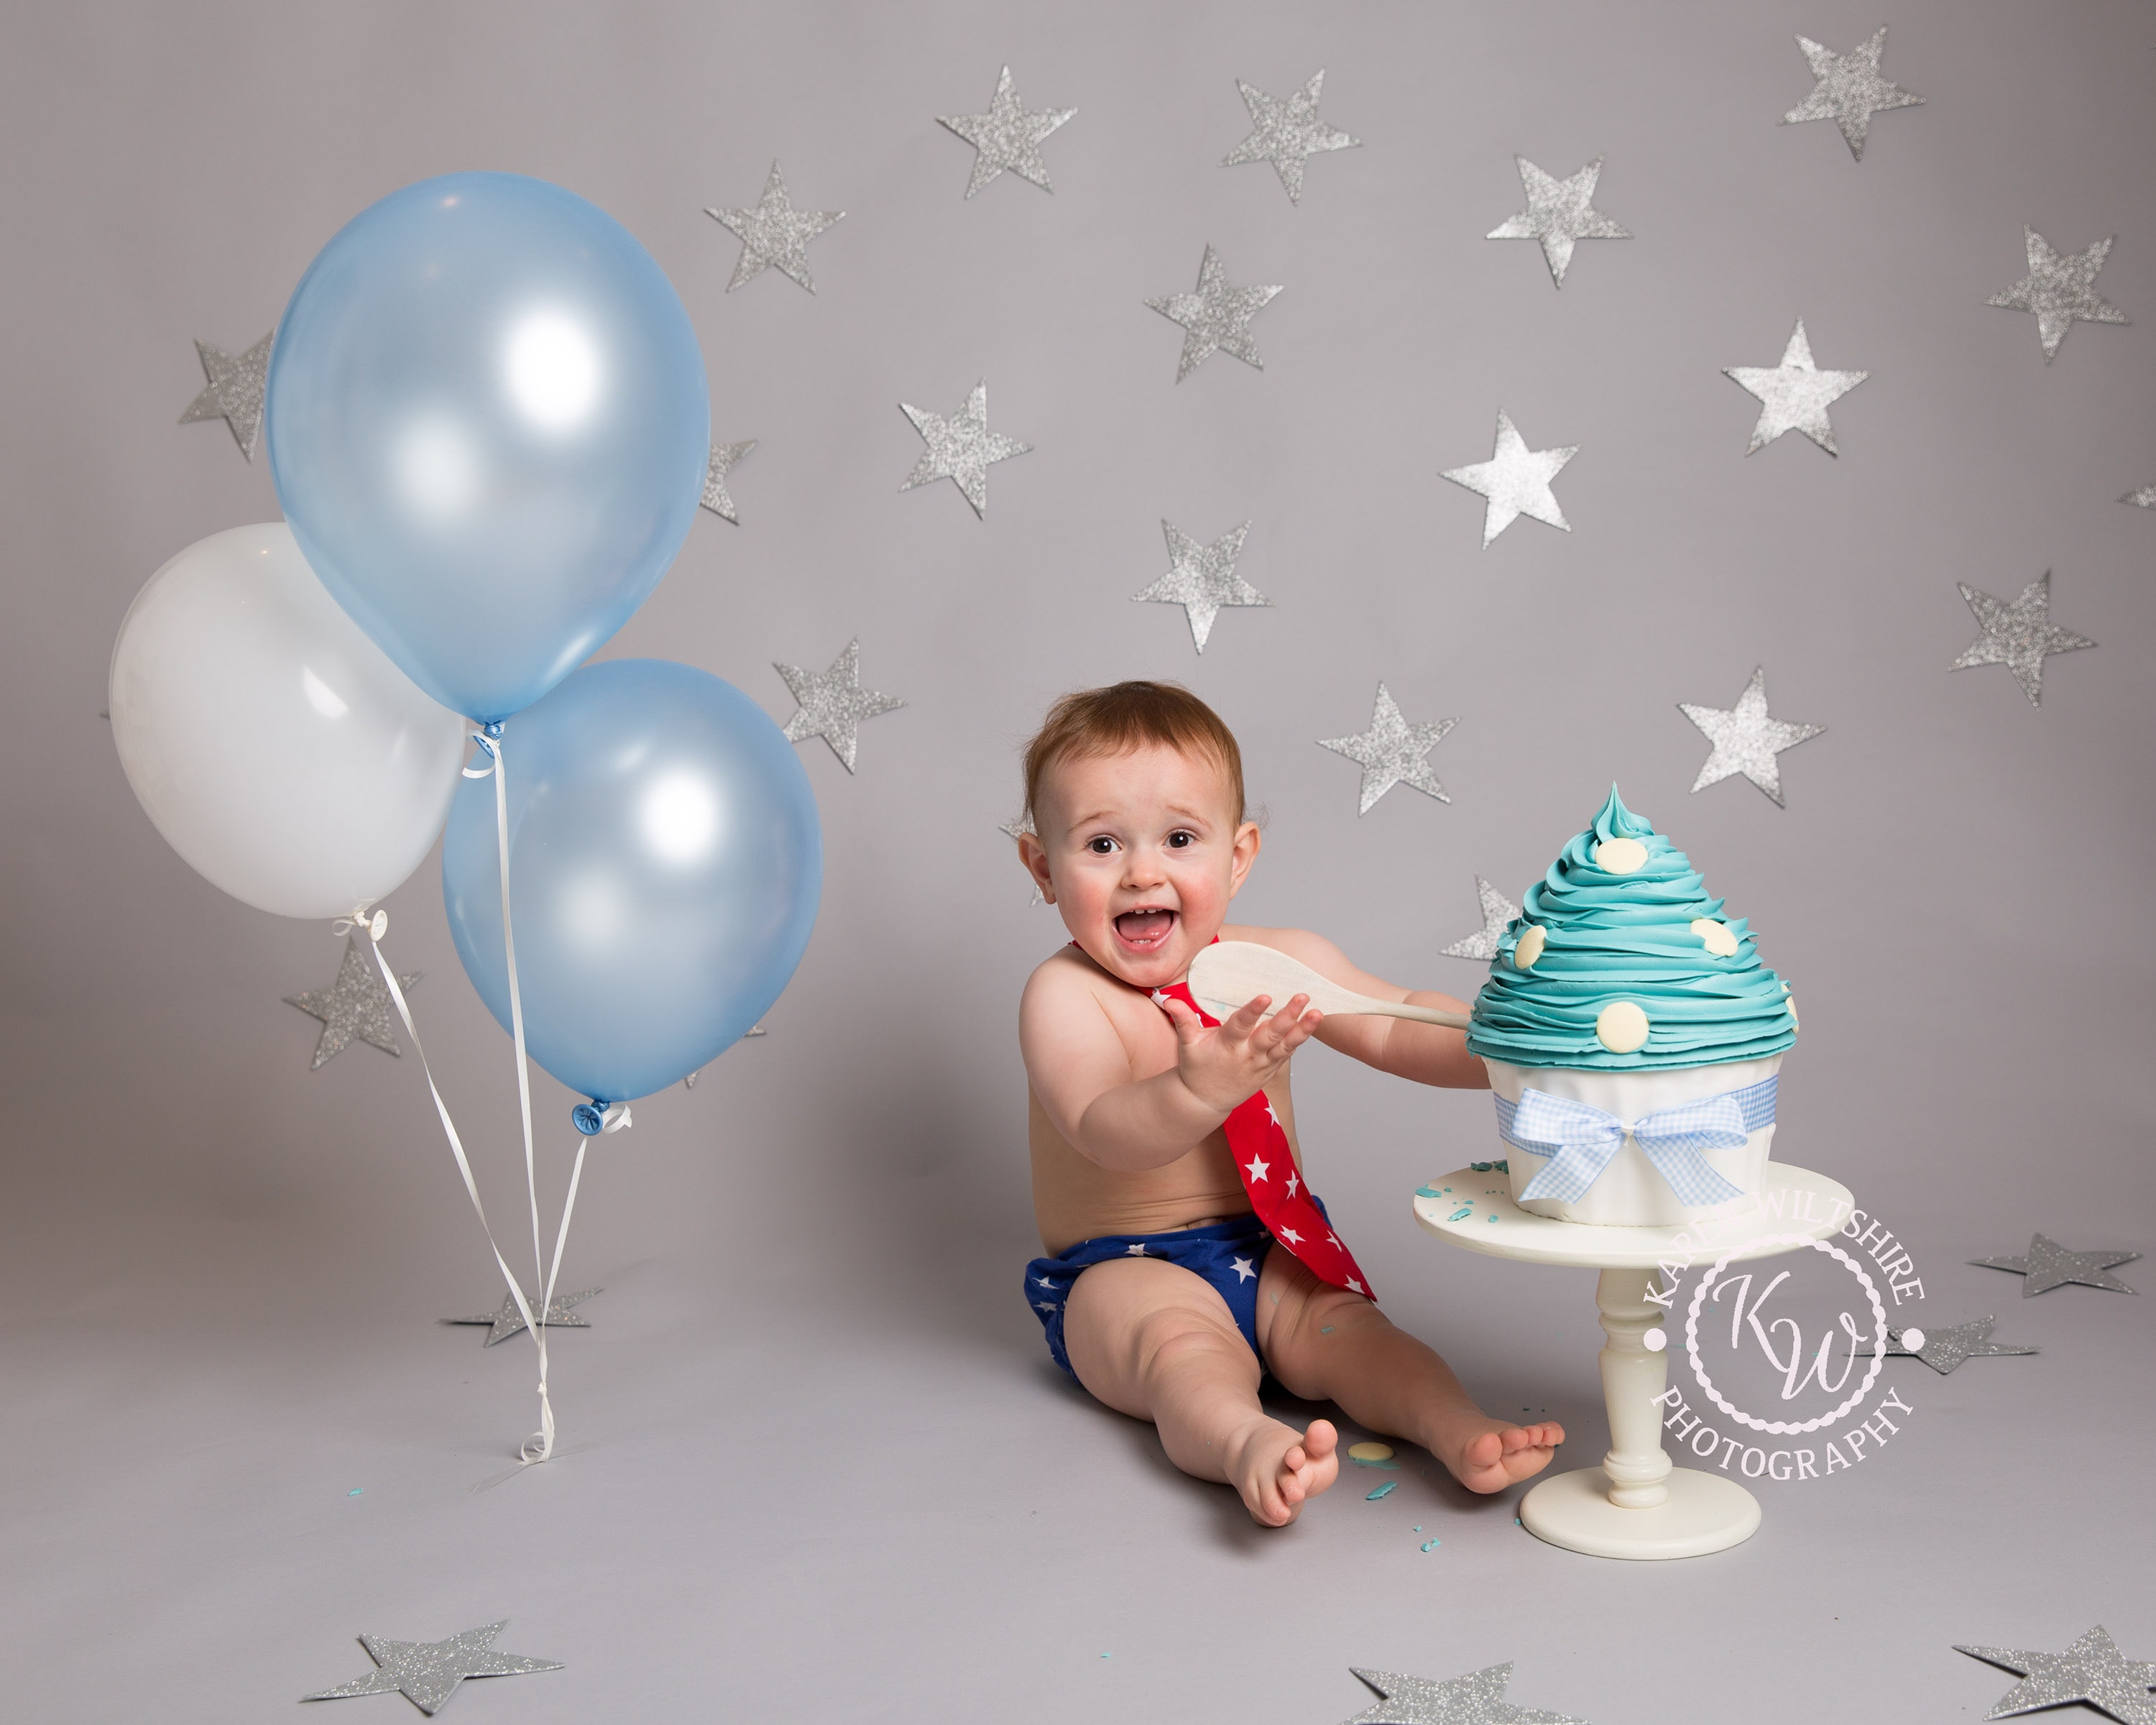 Cake Smash Photo Sessions | Snap Action Photography Geraldton – Snapaction